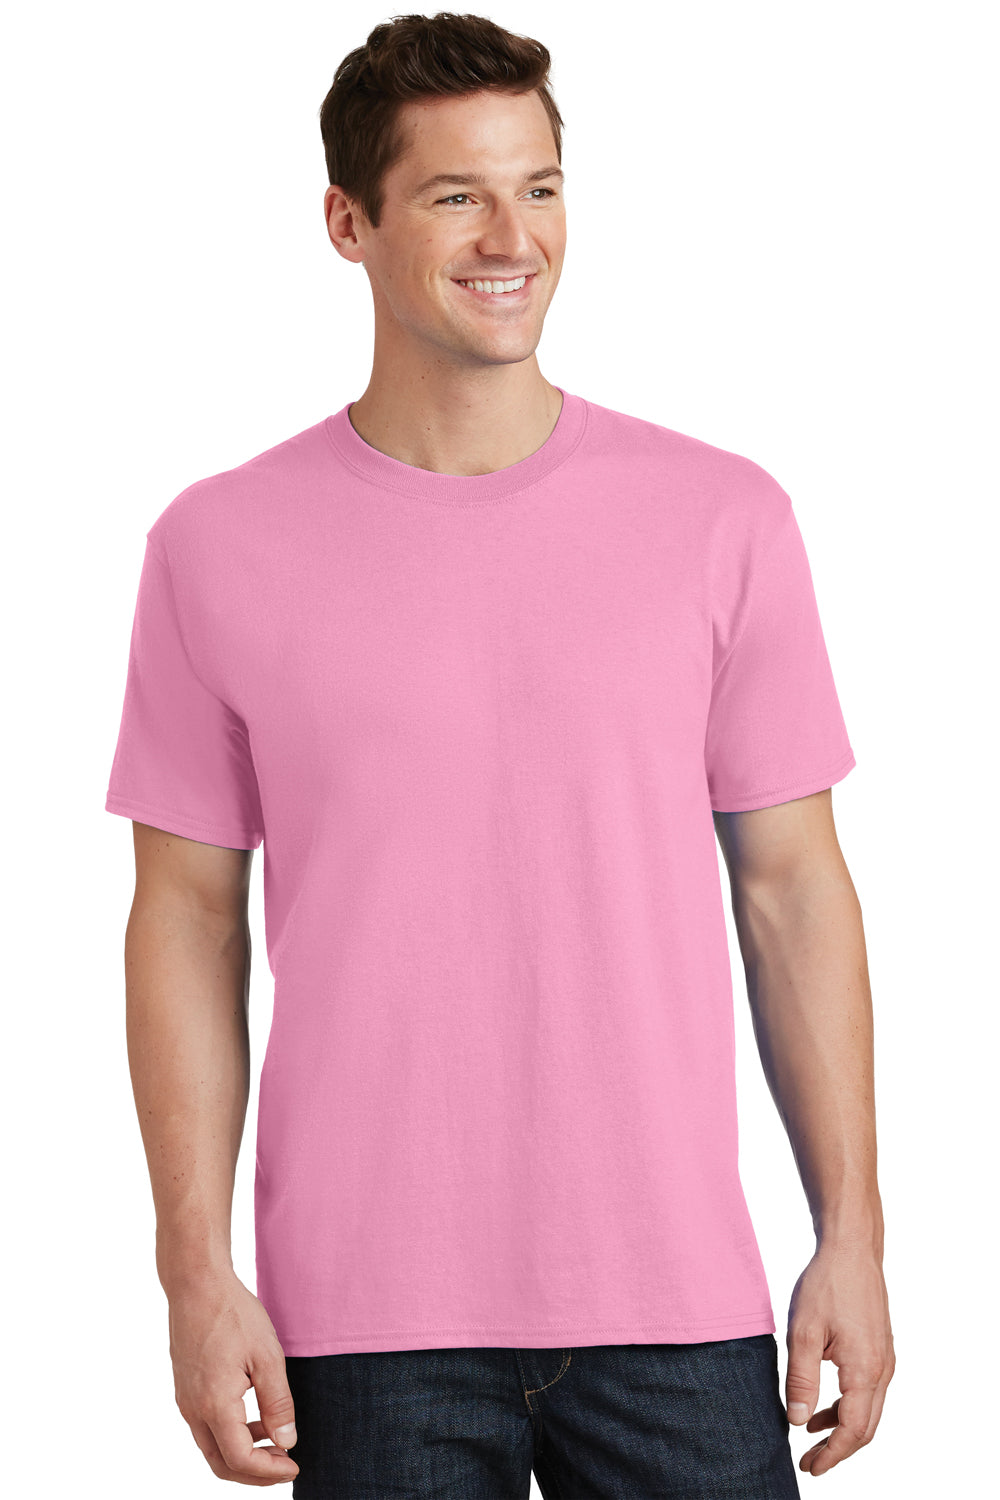 Port & Company PC54 Mens Core Short Sleeve Crewneck T-Shirt Candy Pink Front